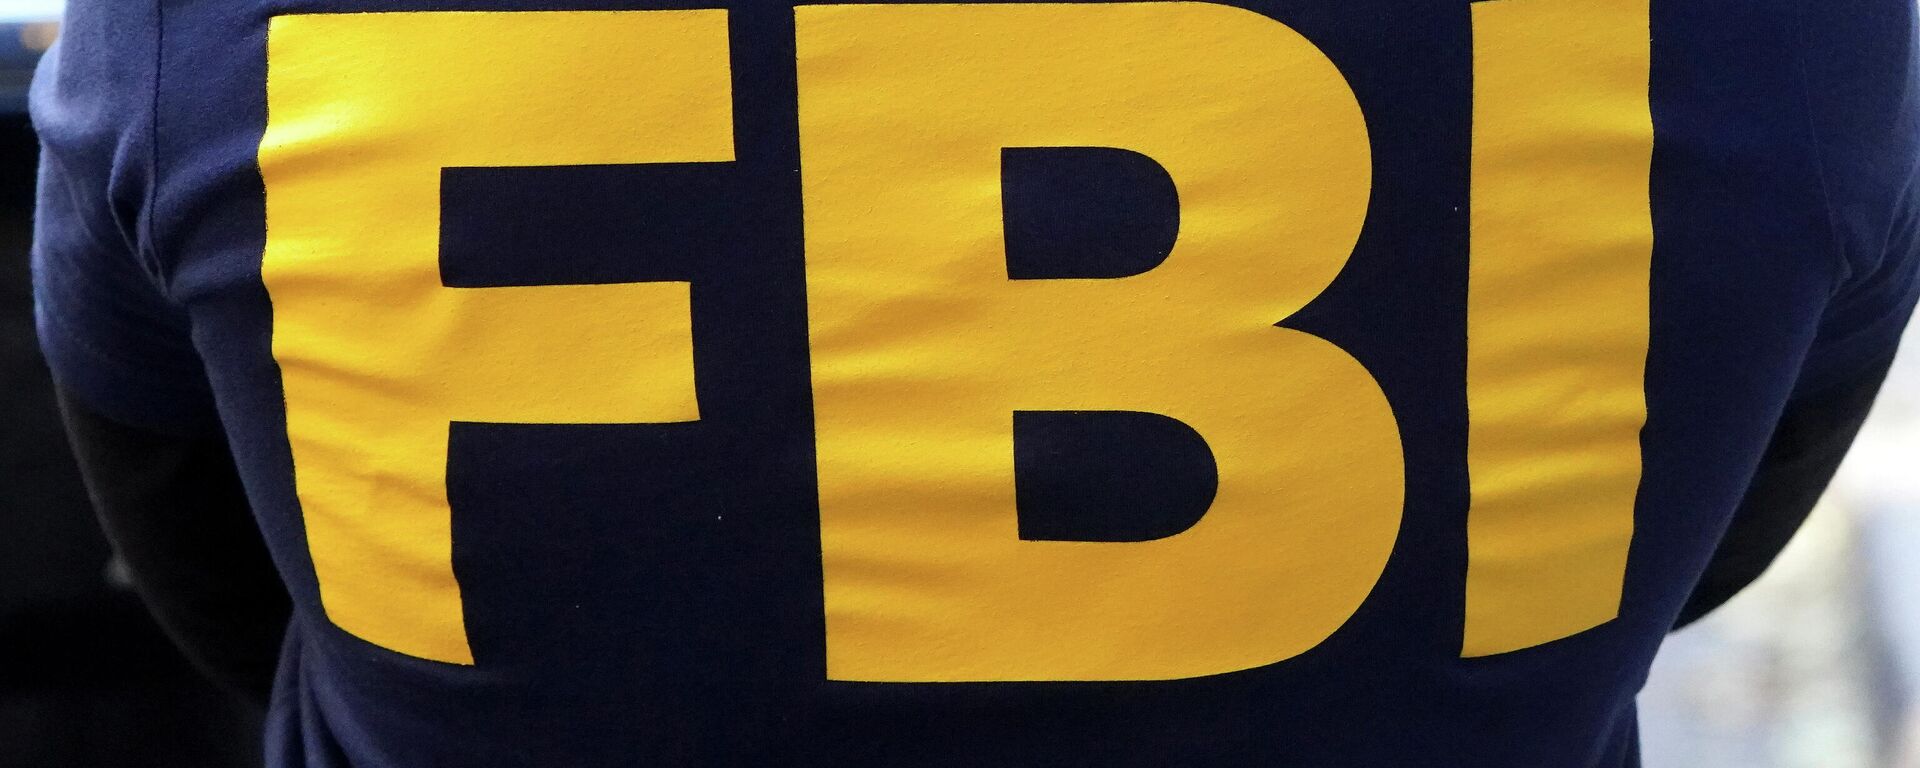 An FBI logo is pictured on an agent's shirt during the U.S. law enforcements raid on Russian oligarch Oleg Deripaska's property in the Manhattan borough of New York City, New York, U.S. October 19, 2021 - Sputnik International, 1920, 27.10.2021